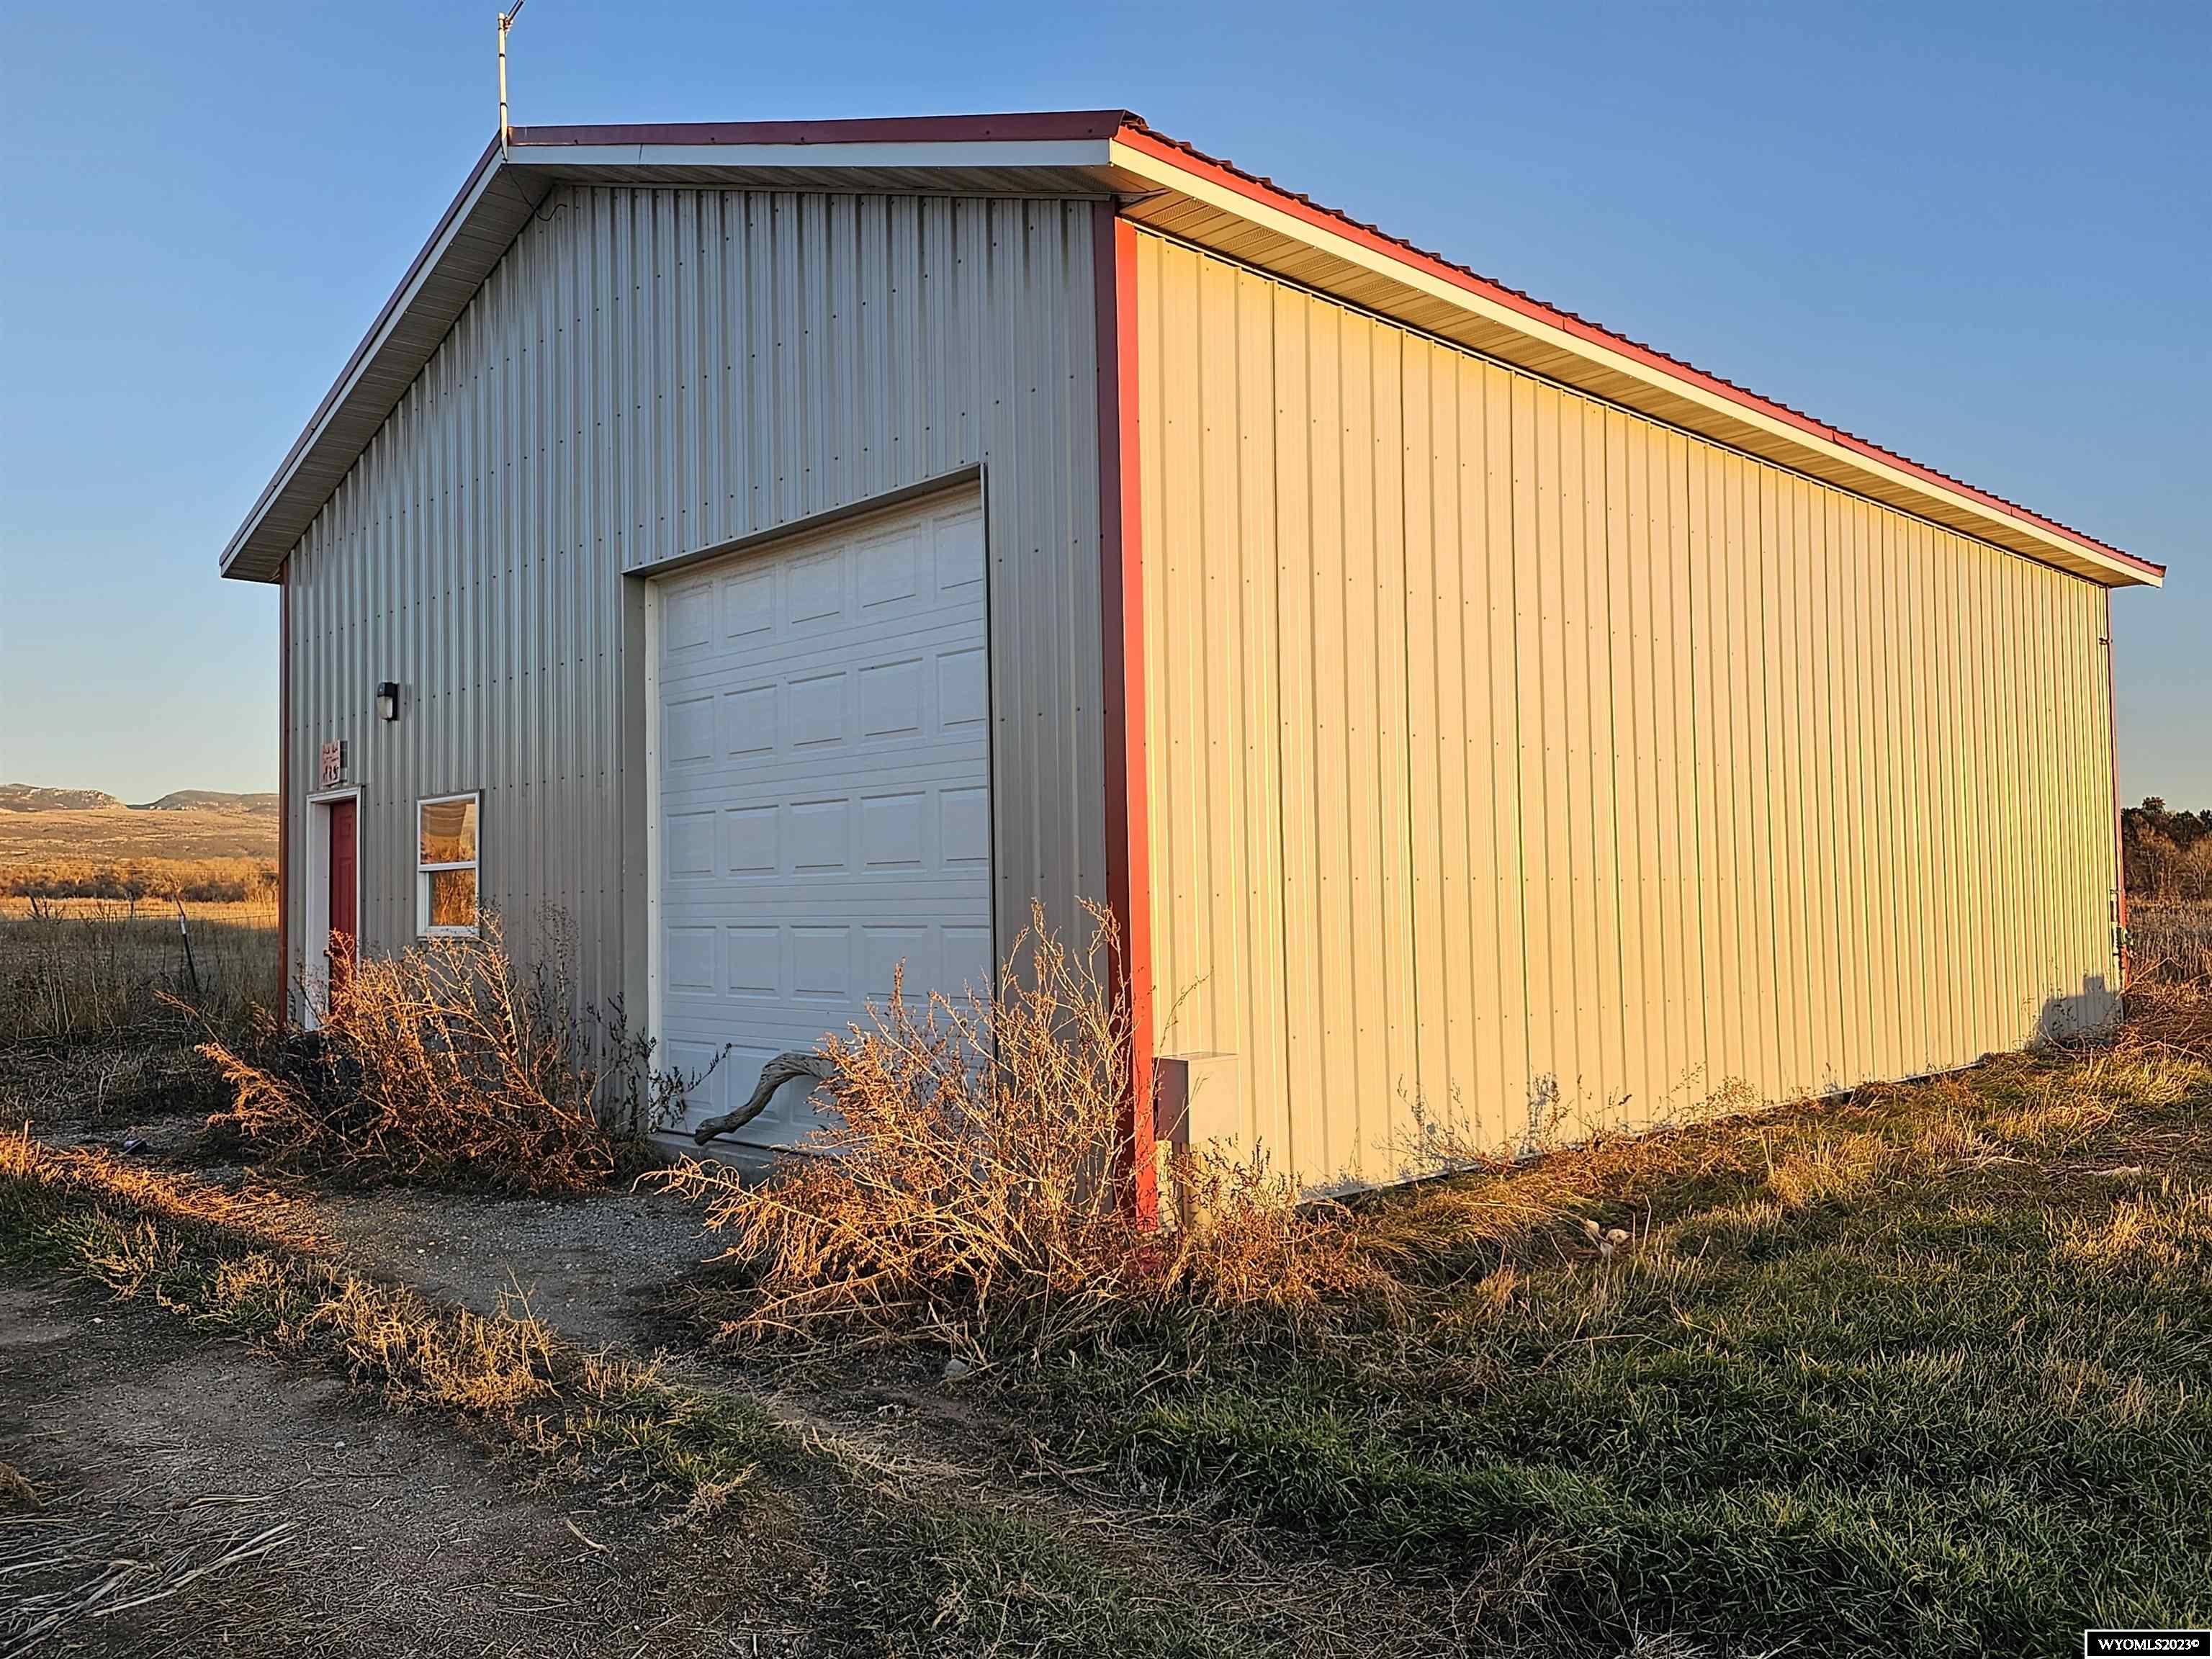 30' x 40' Pole Building Built in 2018 with 1/2 Bathroom. Building has electricity. Perfect spot to build your dream home in Hyattville or turn the shop into a hunting cabin